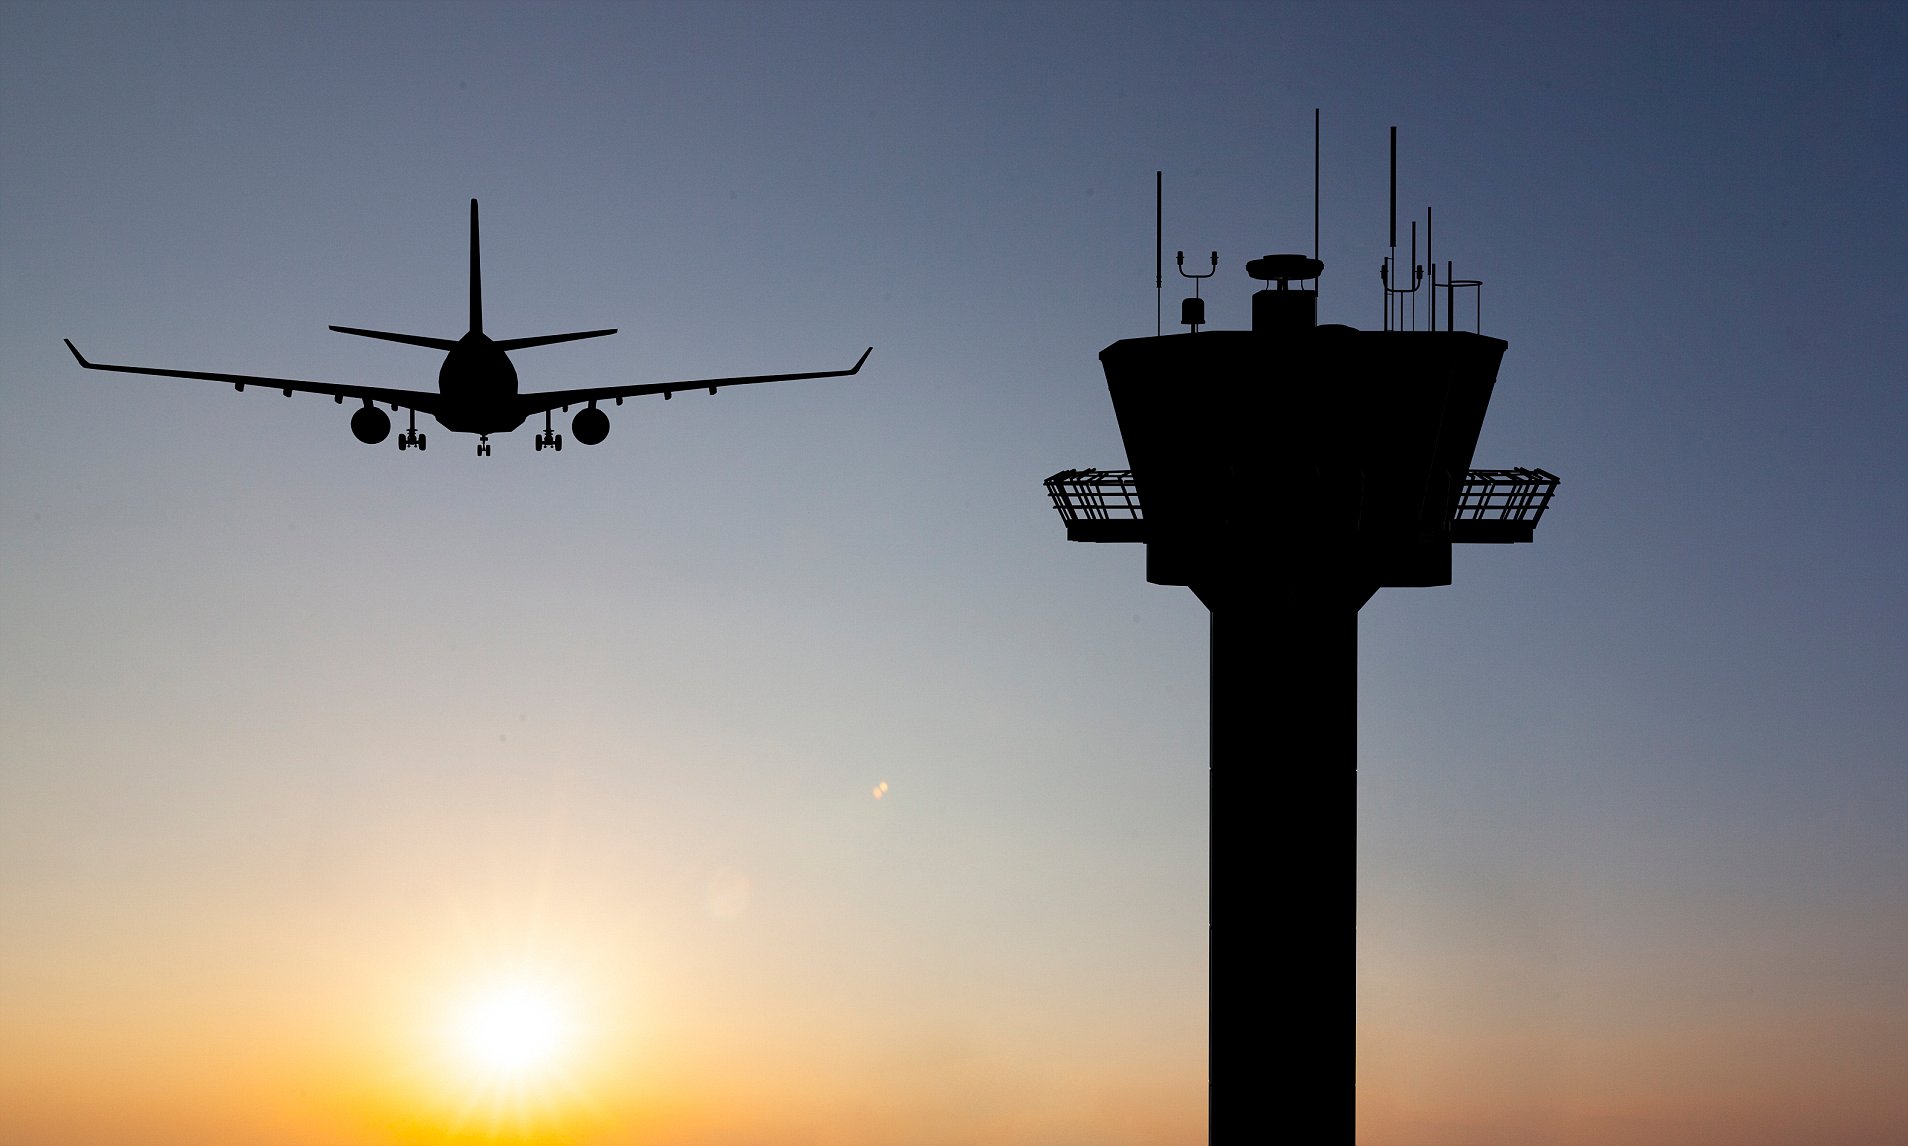 Liveatc The App That Allows You To Eavesdrop On Air Traffic